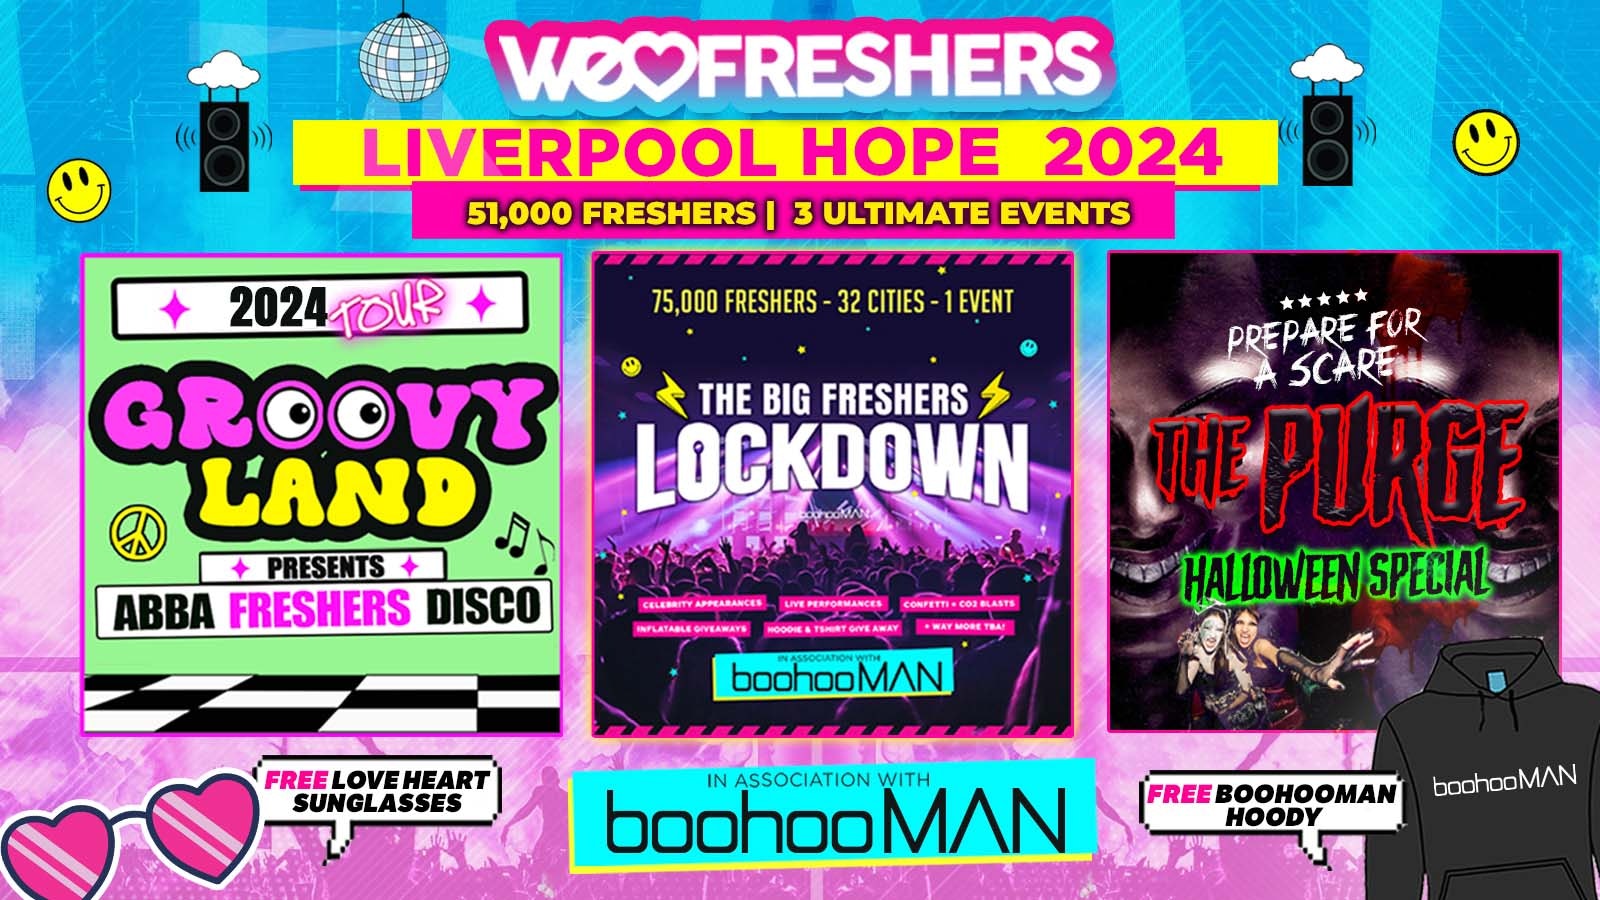 WE LOVE LIVERPOOL HOPE FRESHERS 2024 in association with boohooMAN – 3 EVENTS❗